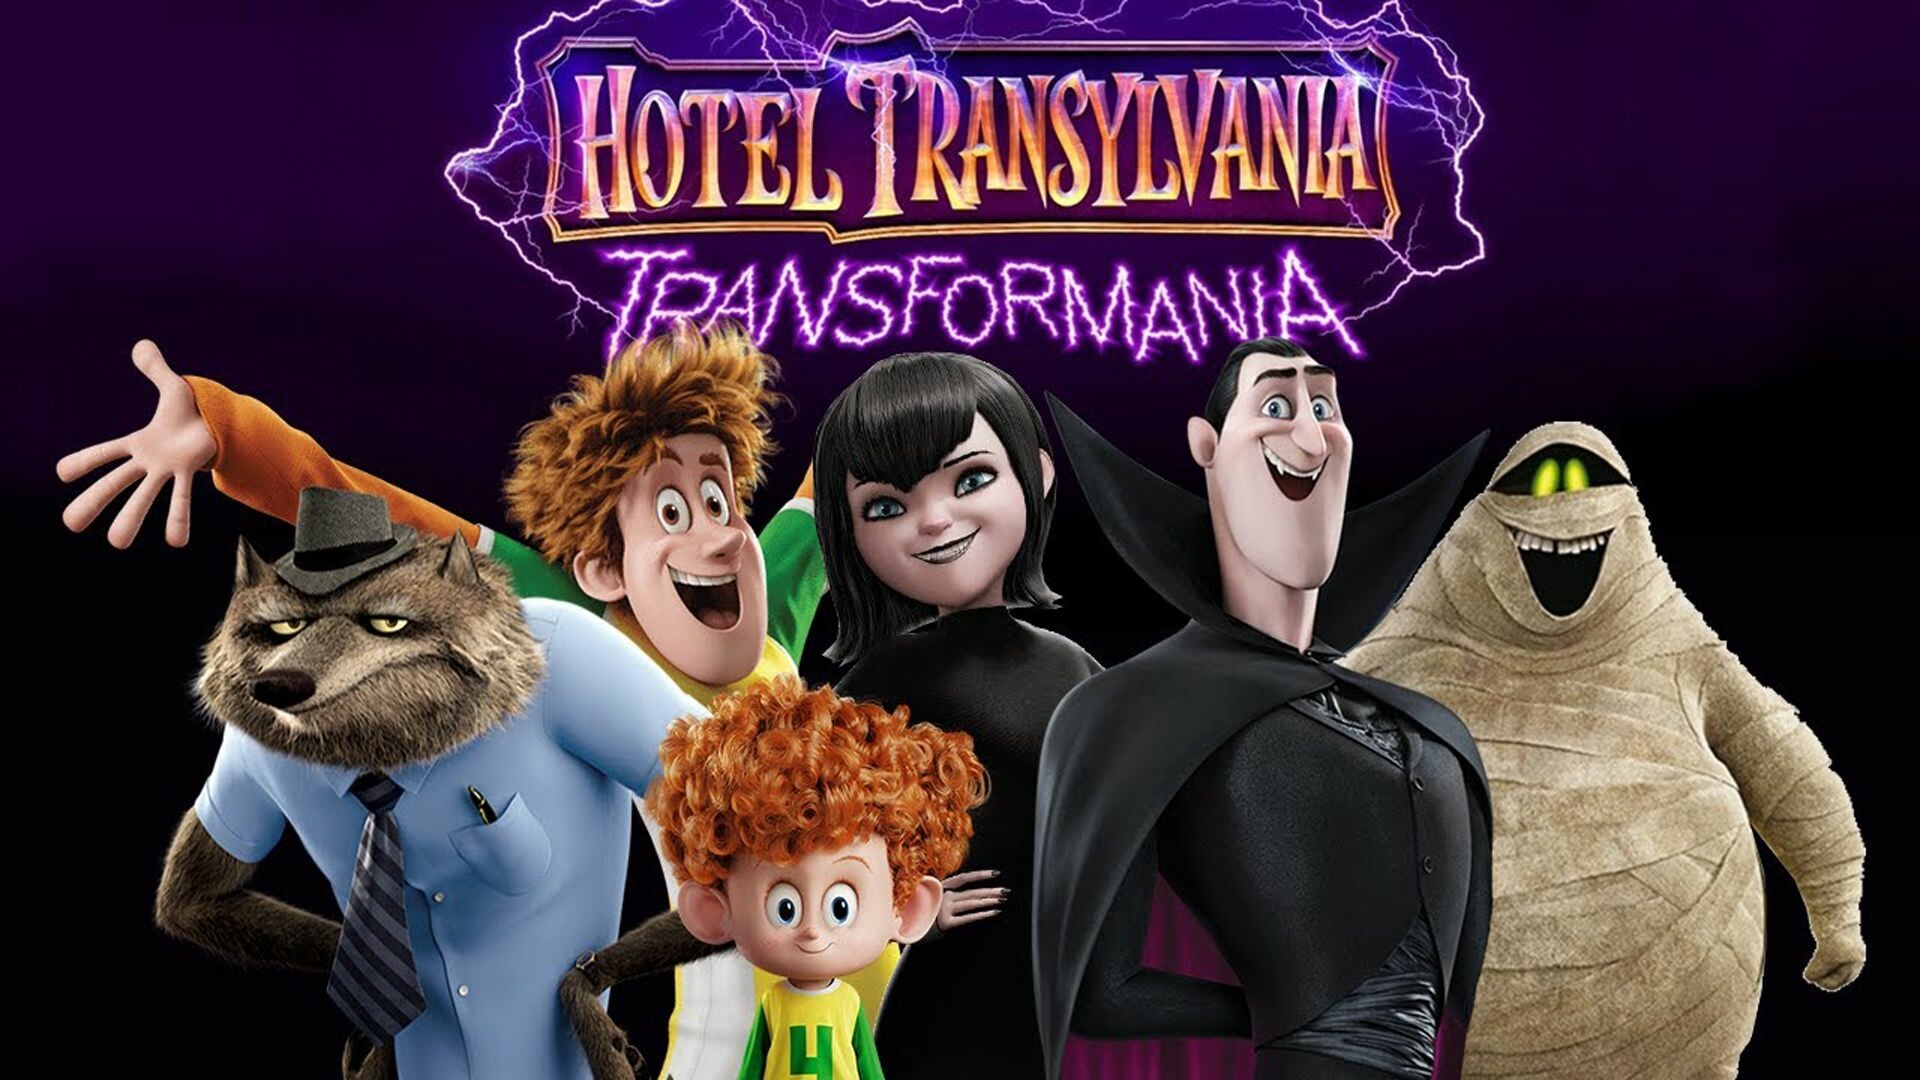 Hotel Transylvania: Transformania: A story about a plaza hotel where monsters can relax and get away from humans due to fear of persecution. 1920x1080 Full HD Background.